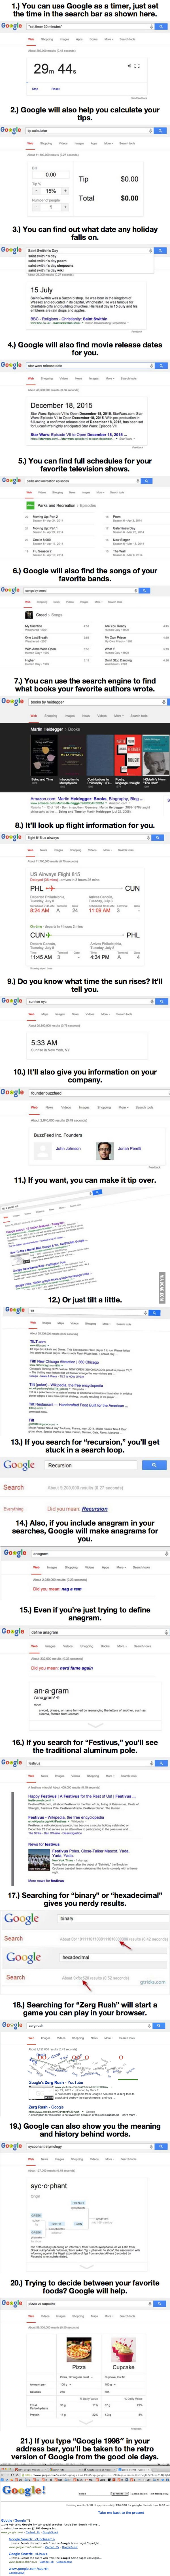 After You Learn These 21 Google Tricks, The Internet Will Never Be The Same.